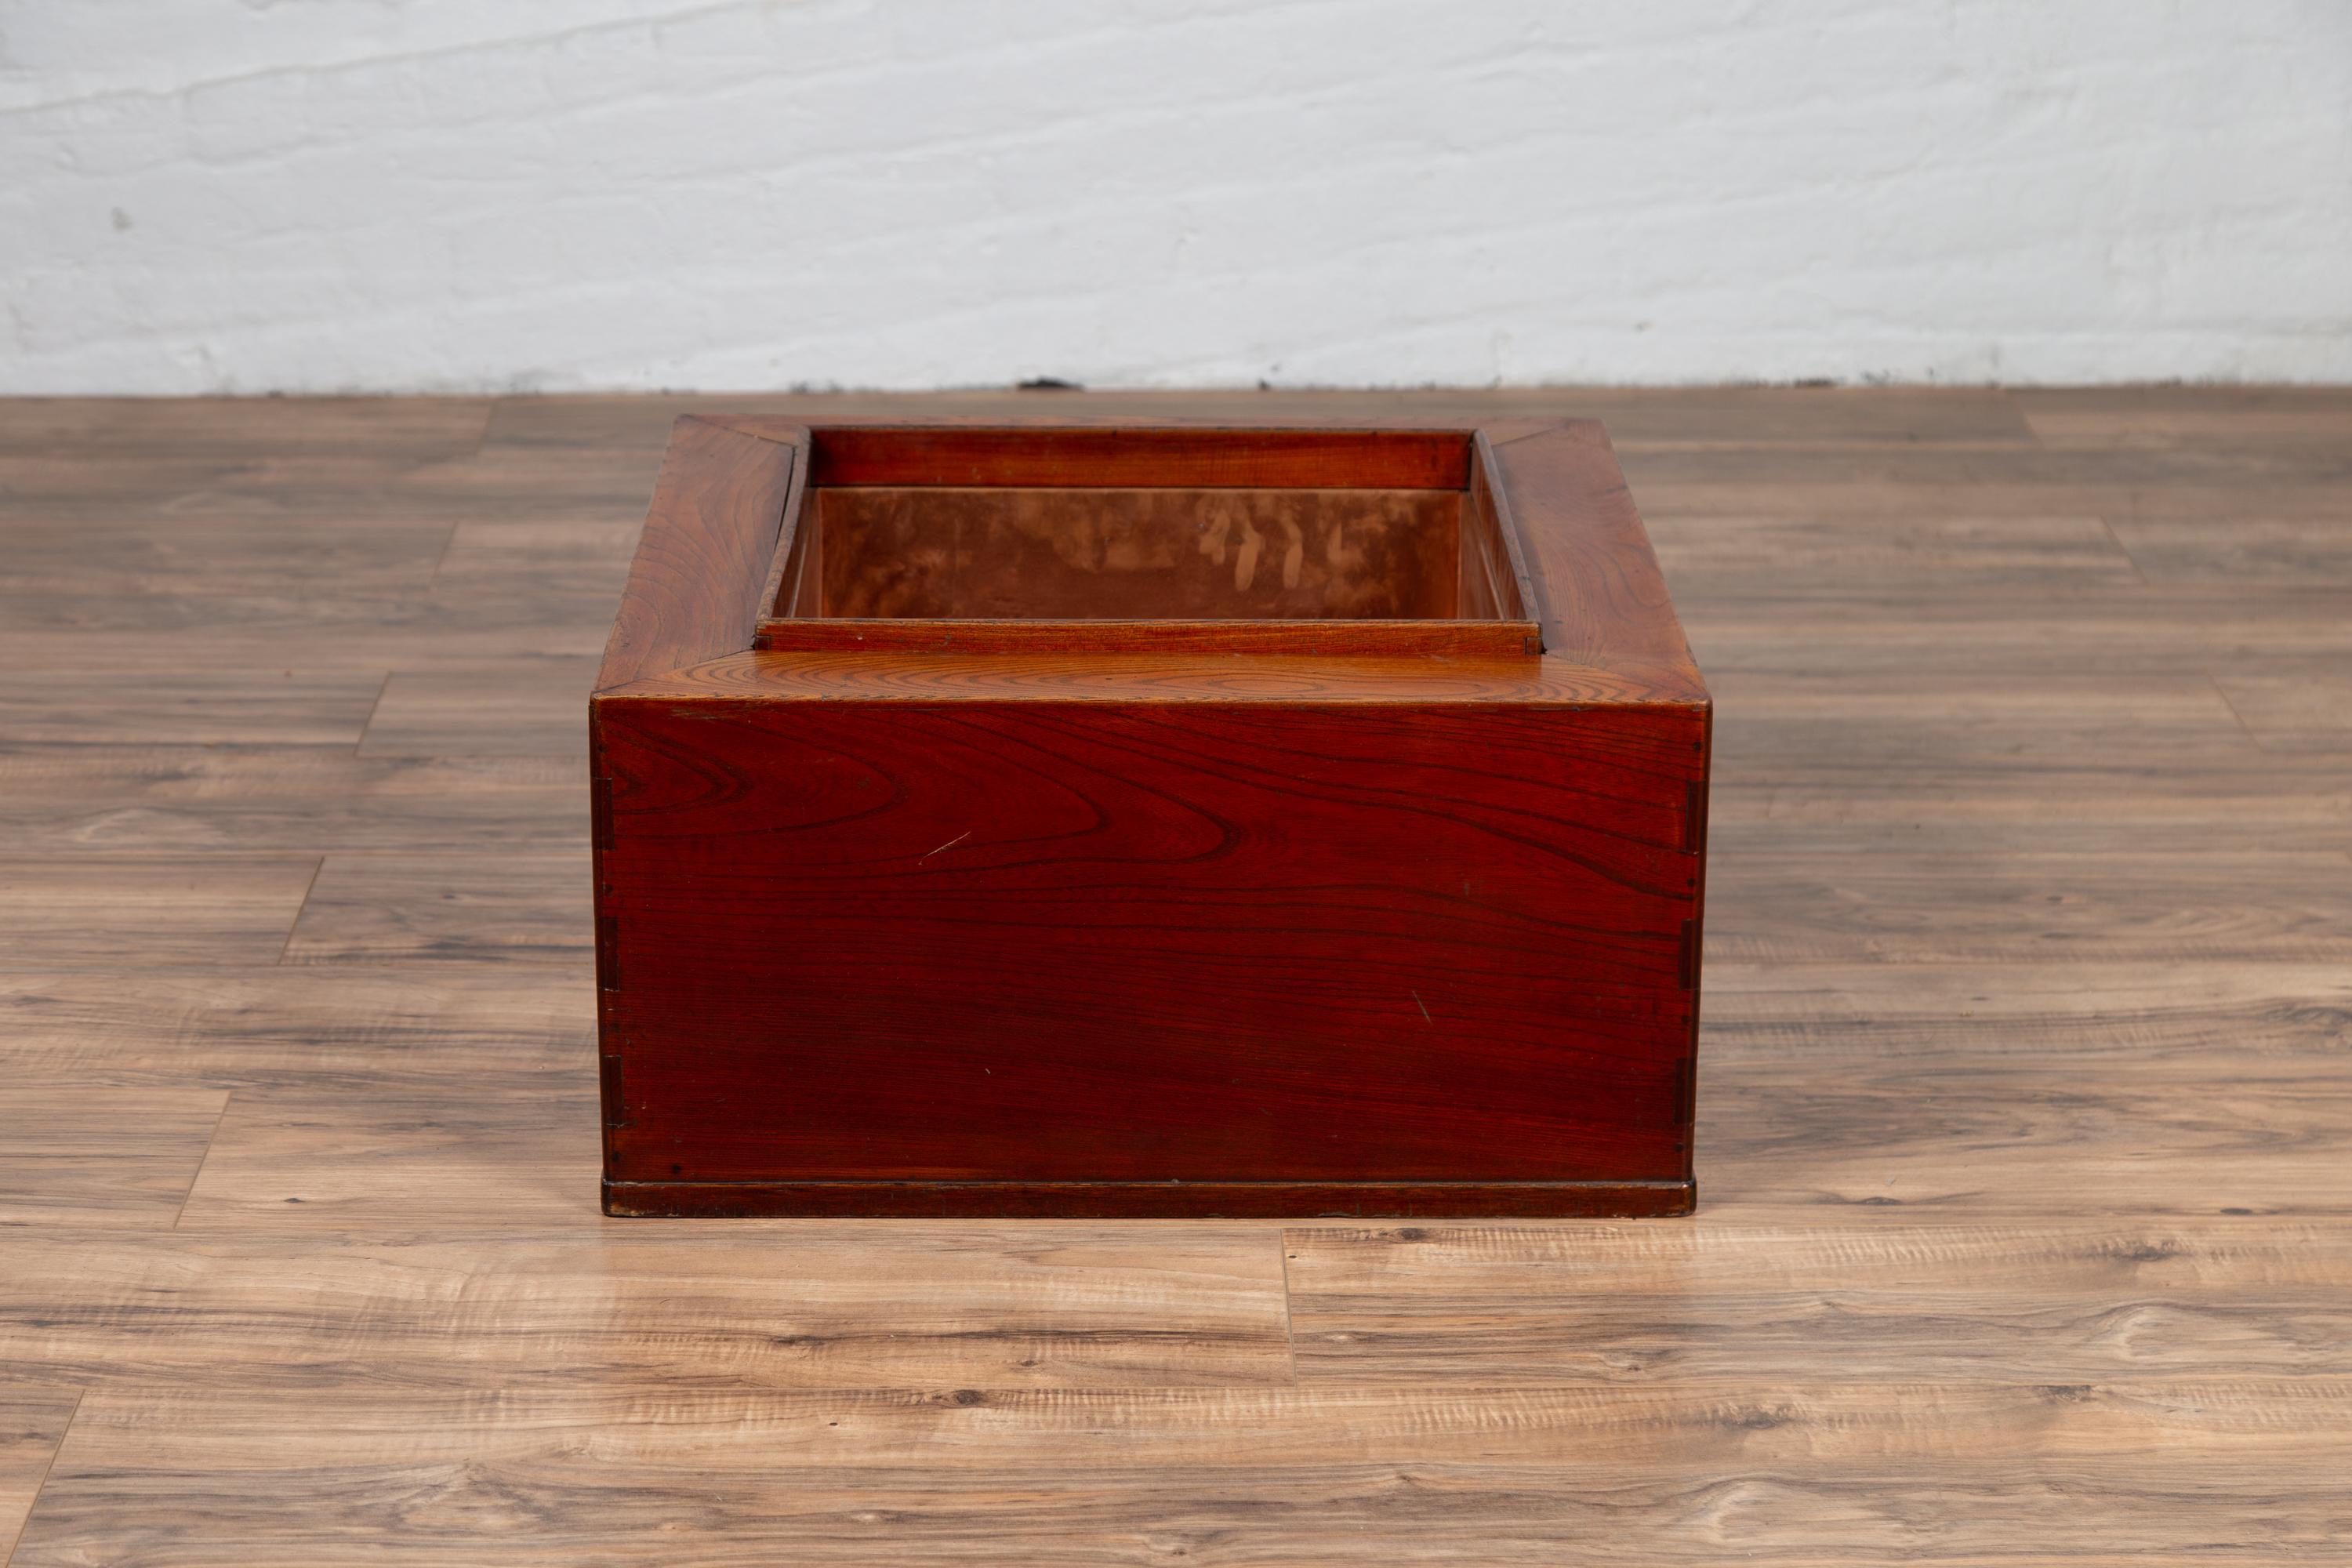 A Japanese rectangular keyaki wood hibachi from the 19th century, with copper liner. Used for cooking or warming sake or tea, this elegant Japanese 19th century hibachi features a rectangular frame surrounding the central opening lined with copper.